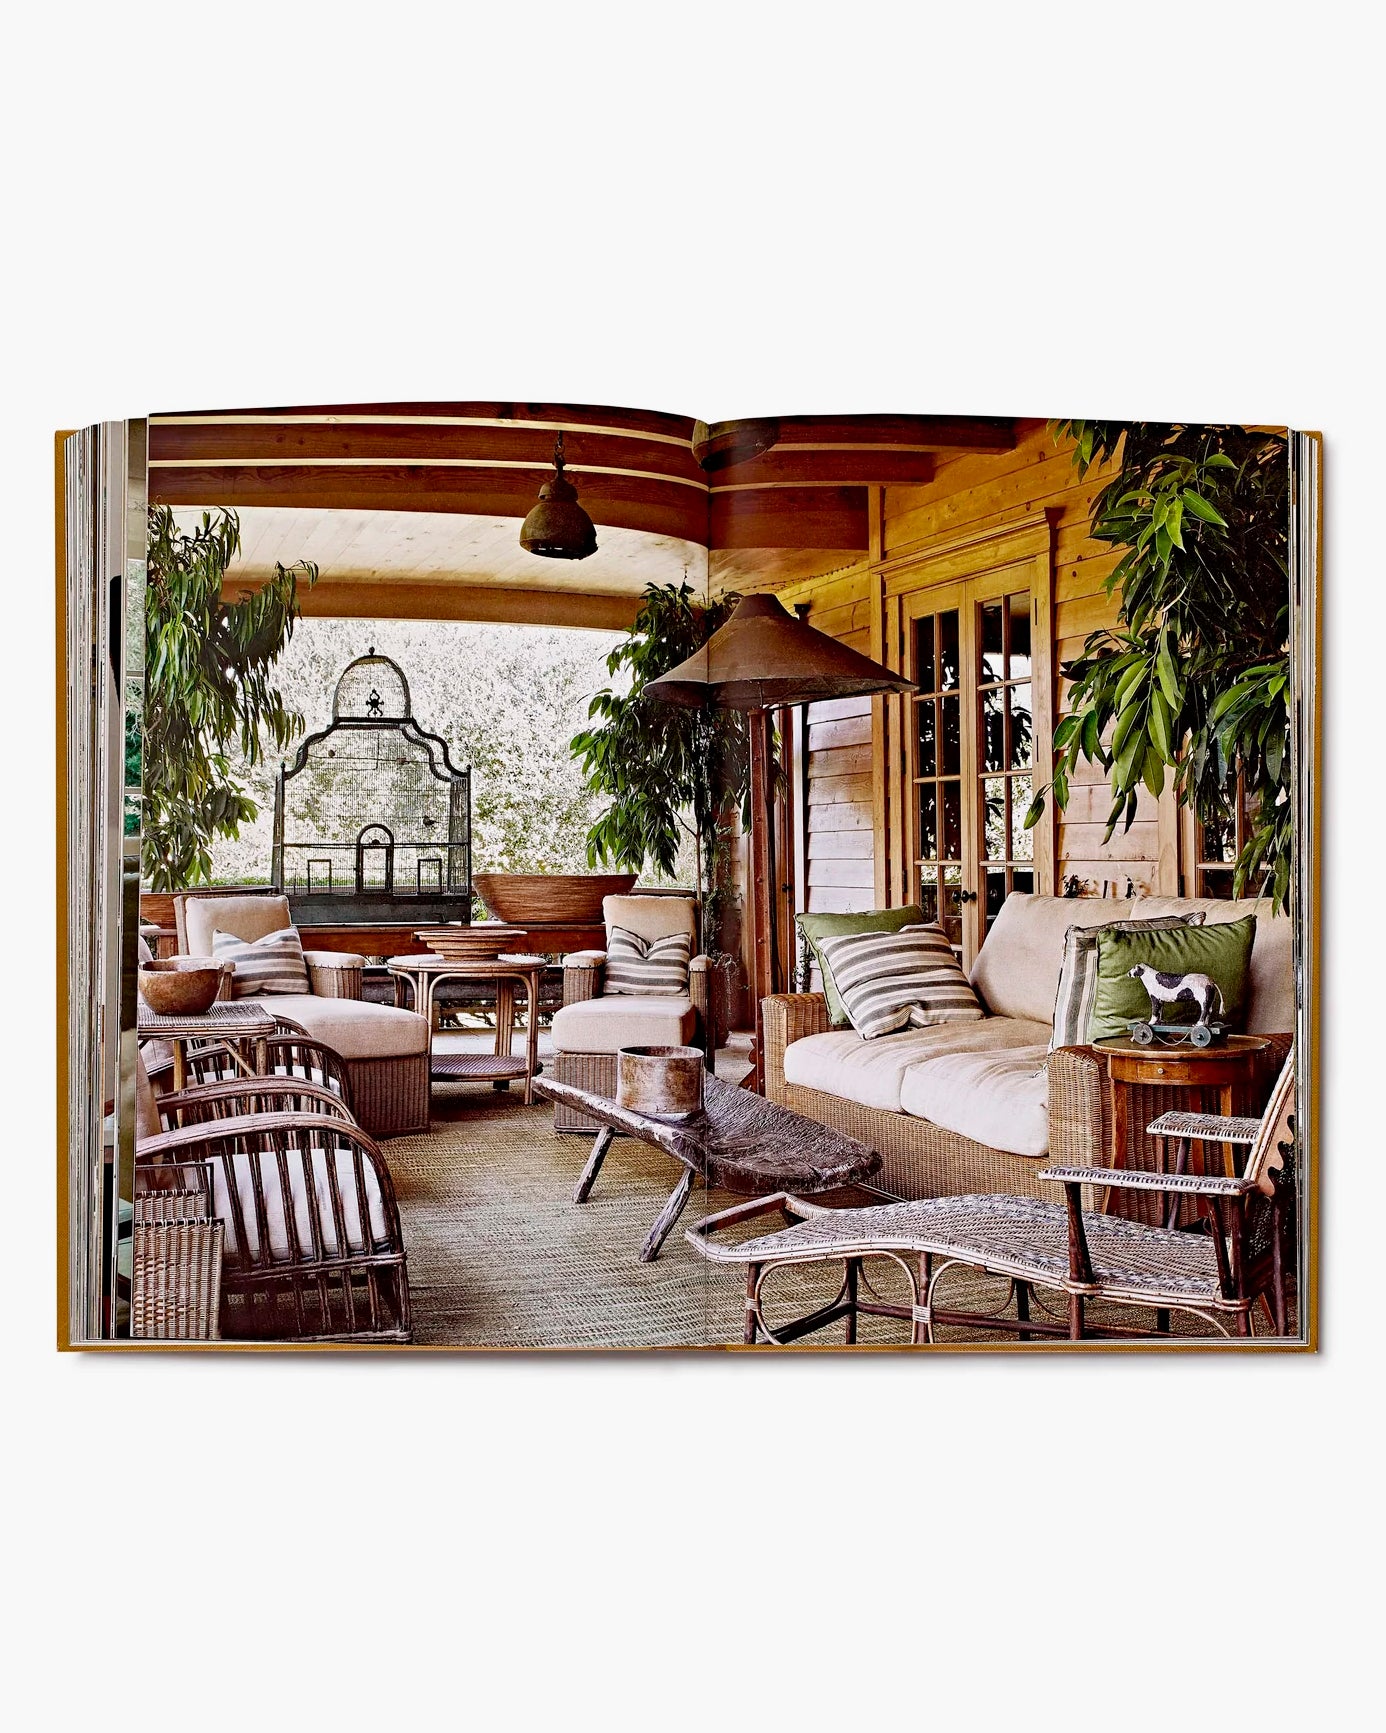 Three Houses by Rose Tarlow - Coffee Table Book